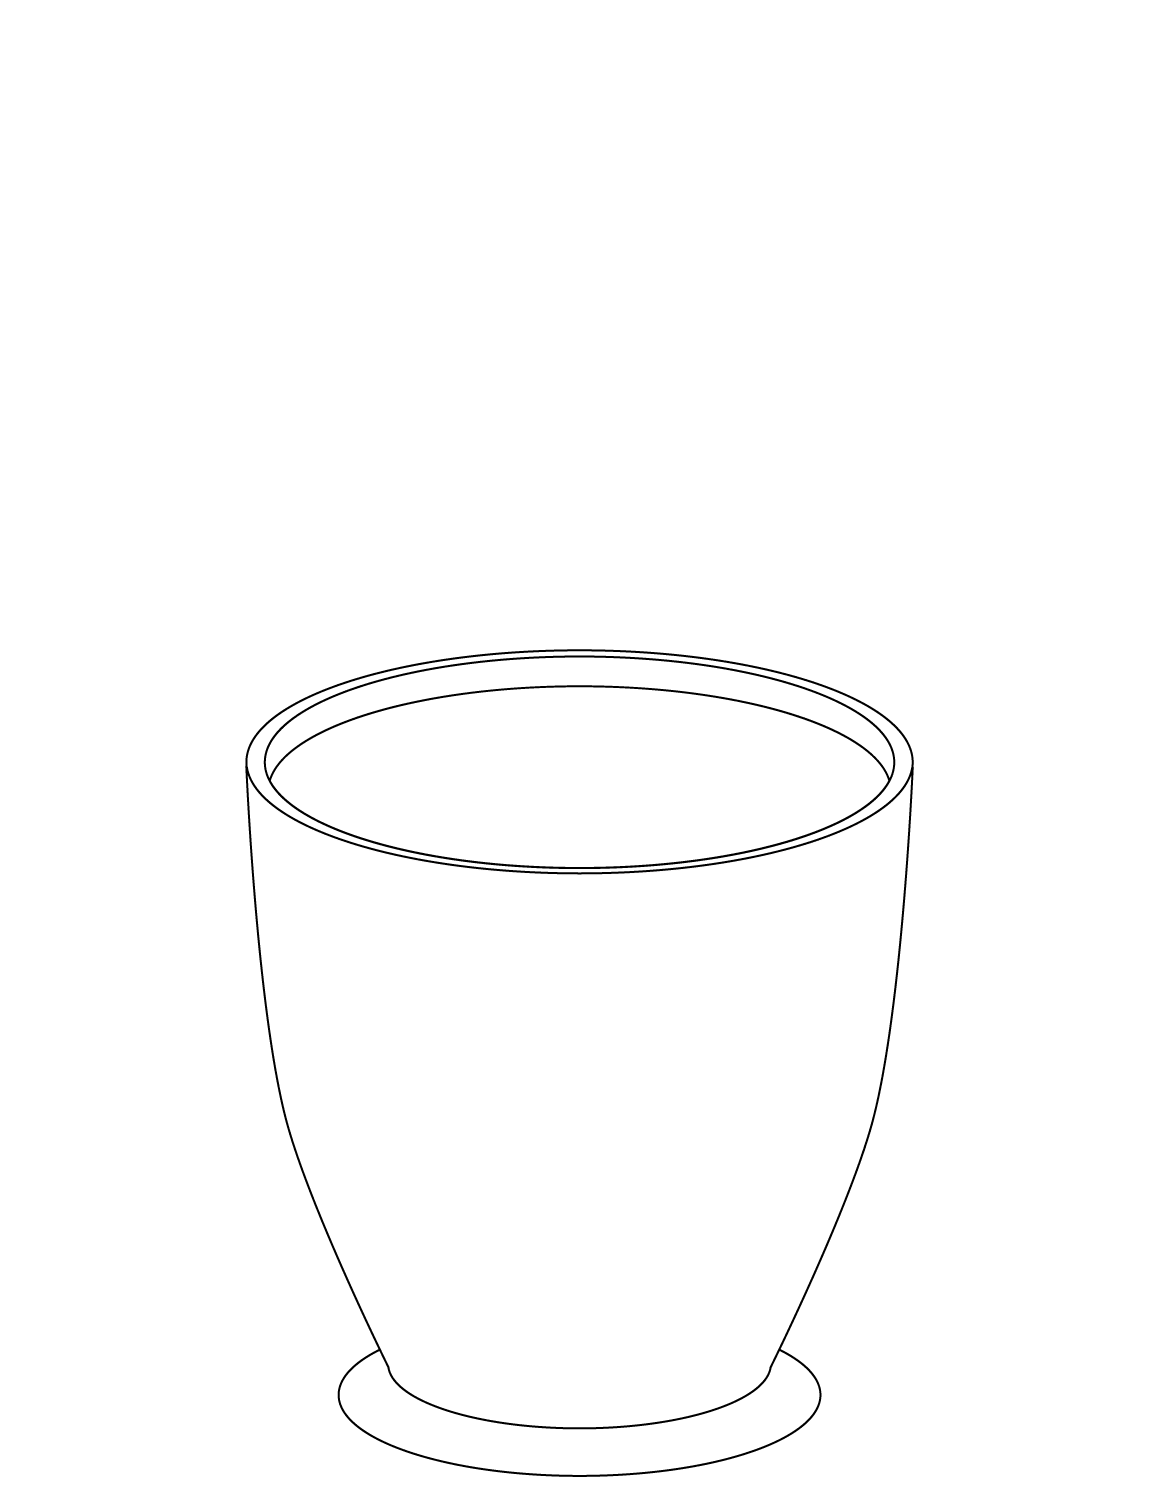 Pot coloring pages to download and print for free